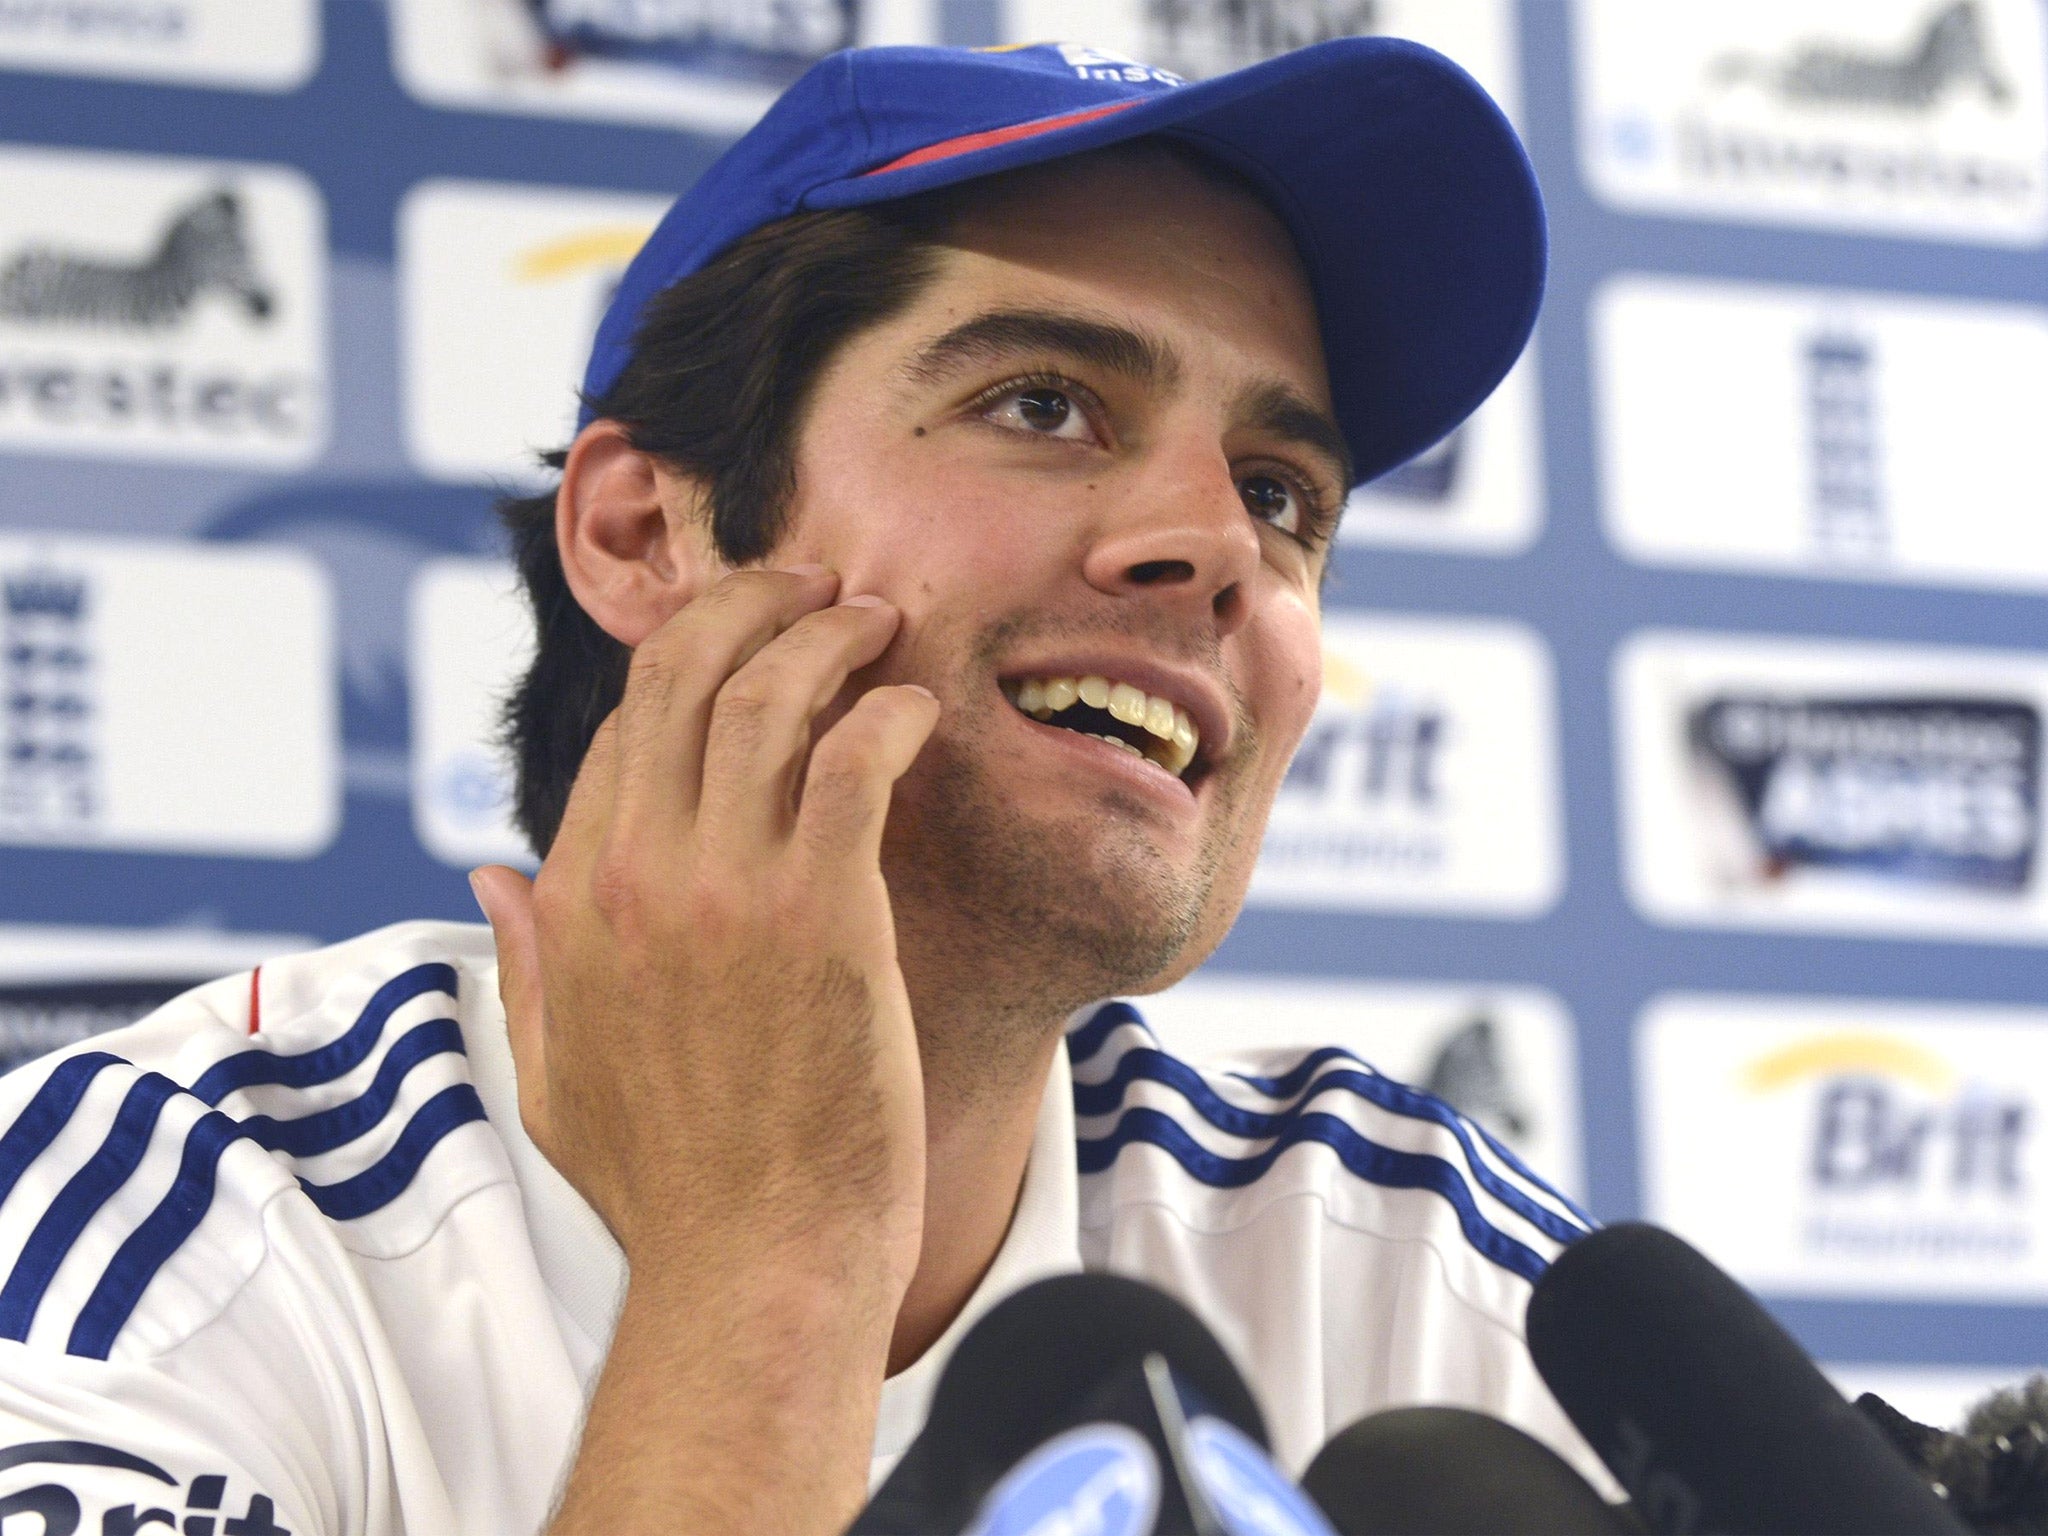 Alastair Cook says the England players will take things 'one hour at a time'